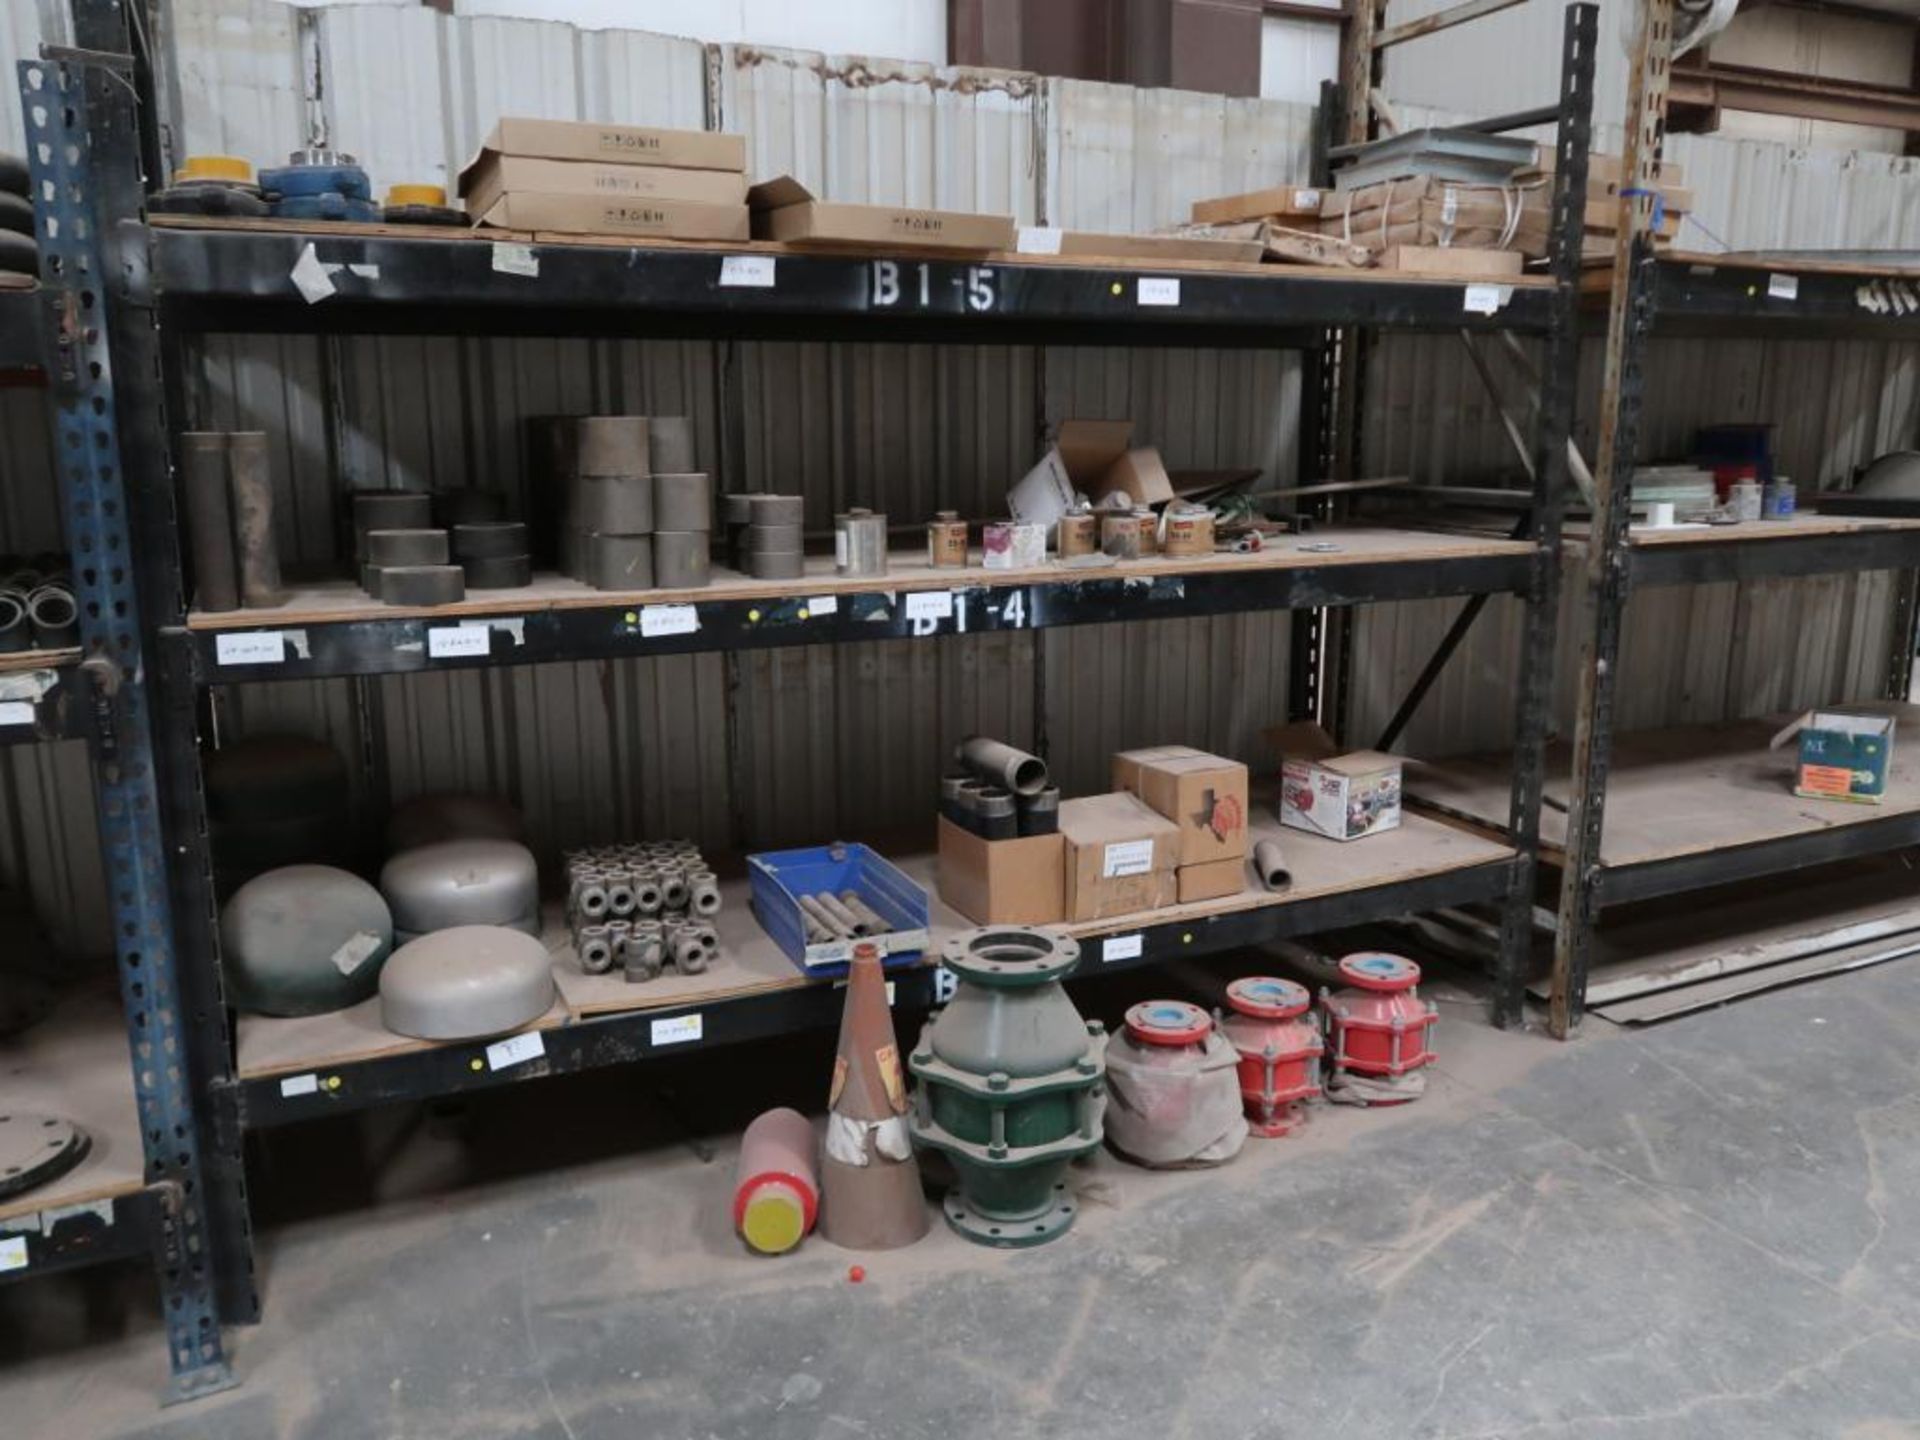 CONTENTS OF PALLET RACK INCLUDING STAINLESS PIPE & FITTINGS, PIPE FITTINGS AND WELD FITTINGS